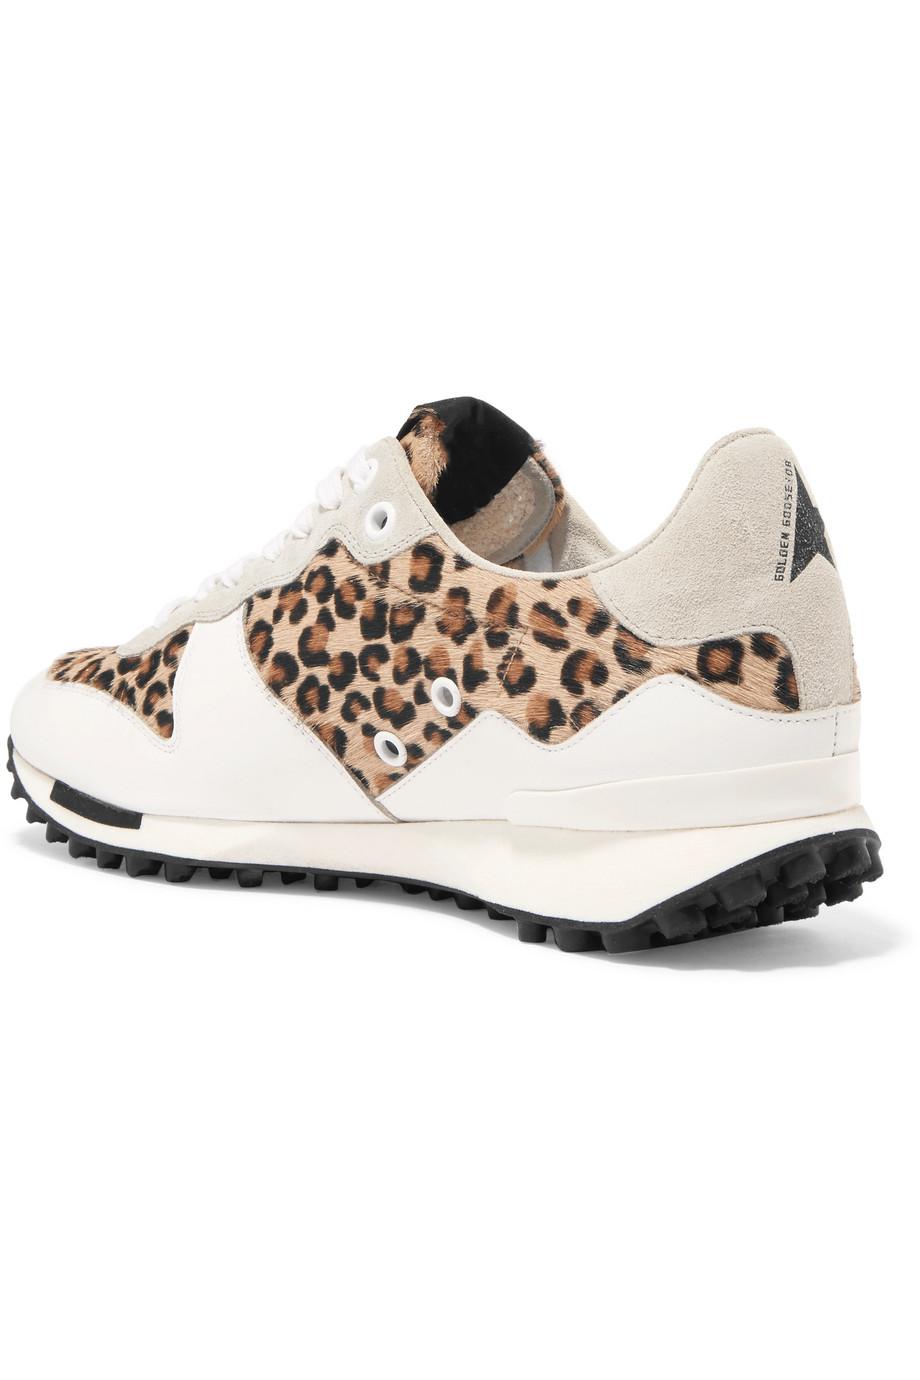 Golden Goose Starland Leopard-print Calf Hair, Suede And Leather Sneakers |  Lyst